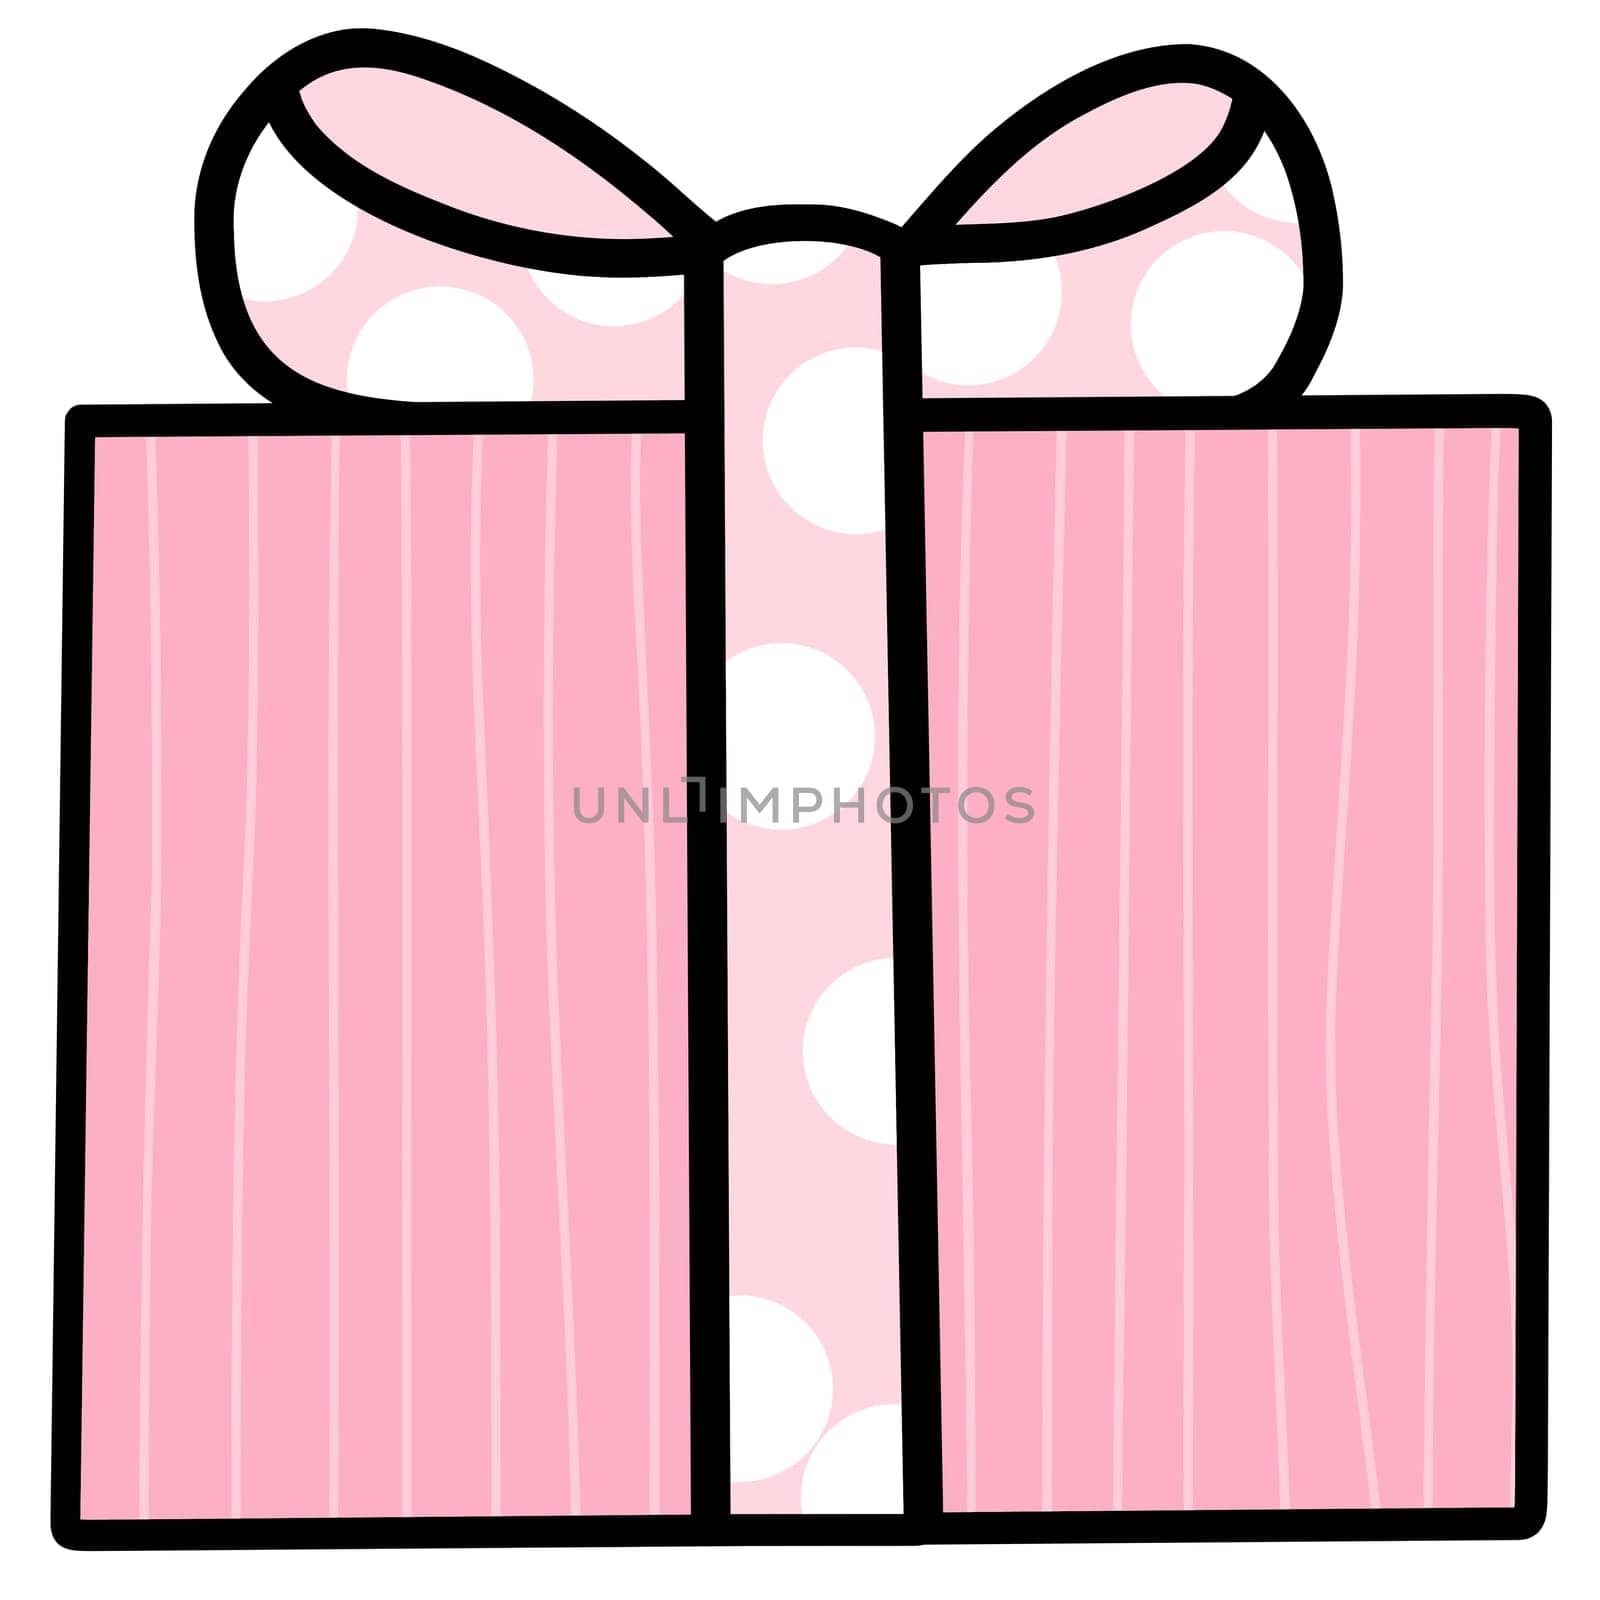 Drawing of pink gift box isolated on white background for usage as an illustration and an item given to show goodwill on various occasions